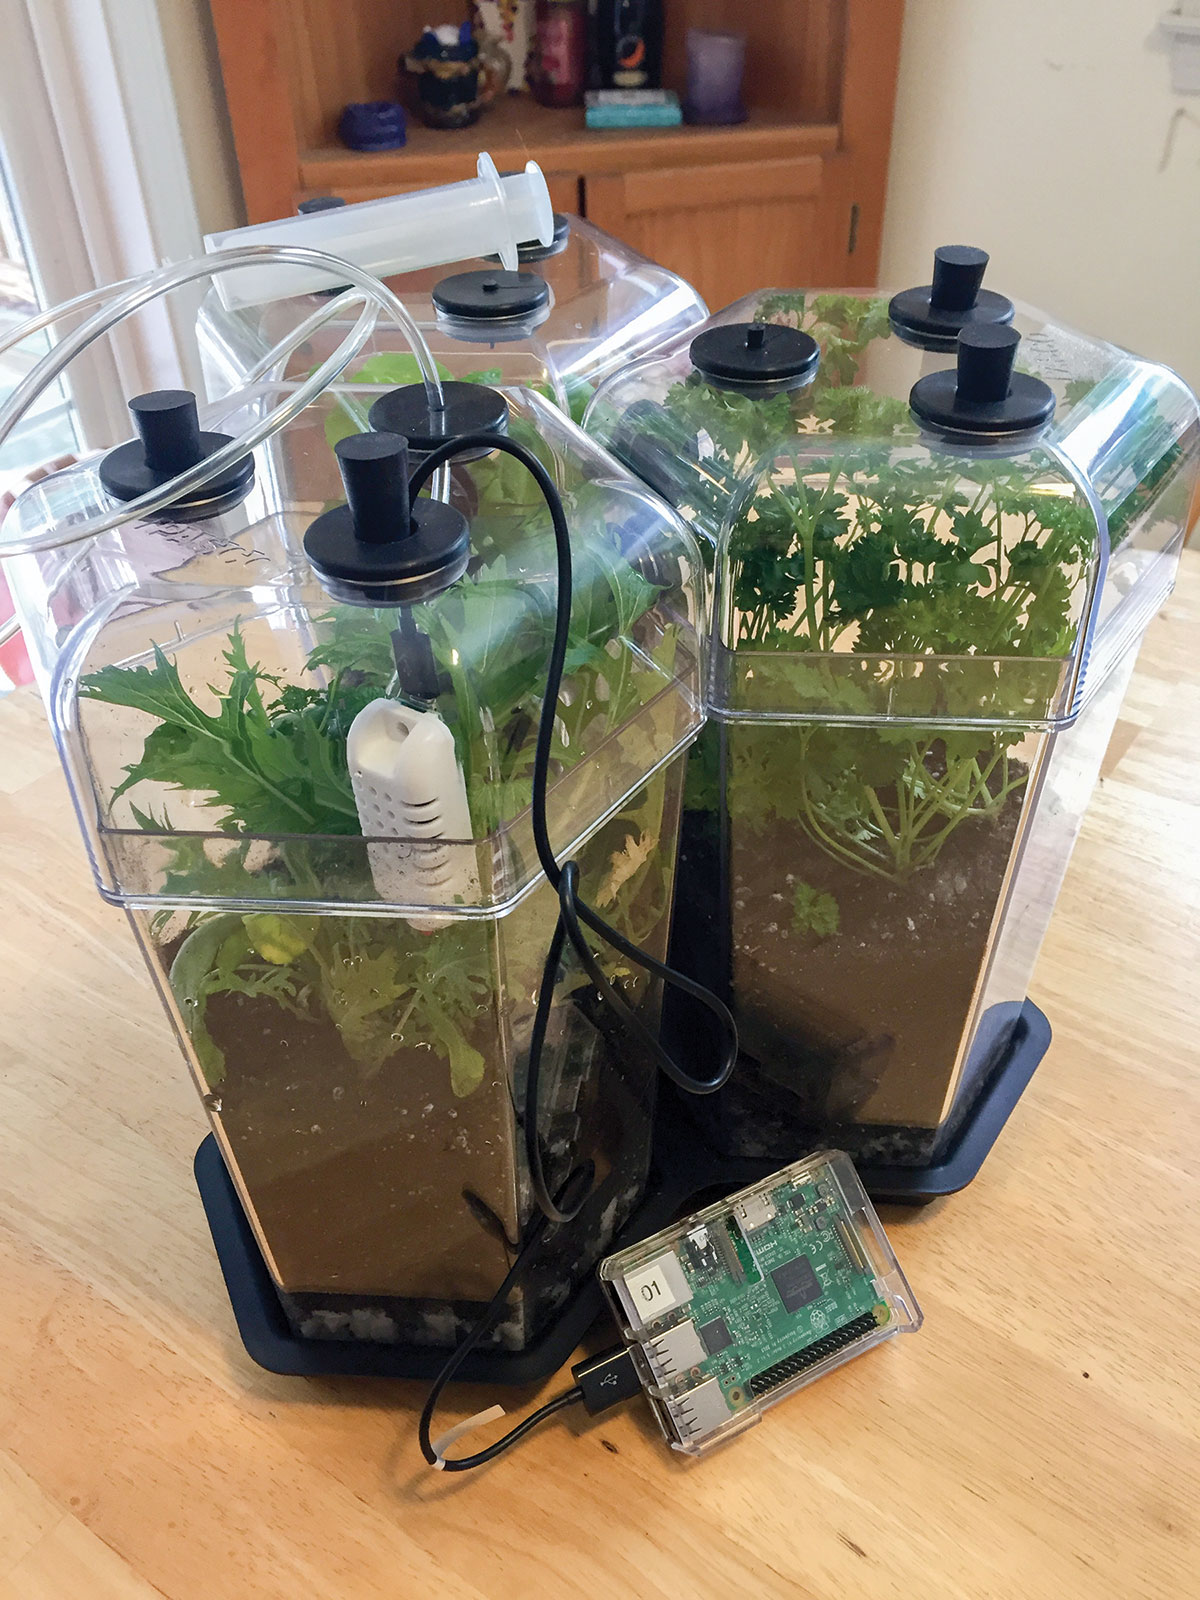 Growth chambers made by PASCO connect to a credit card sized Raspberry Pi computer